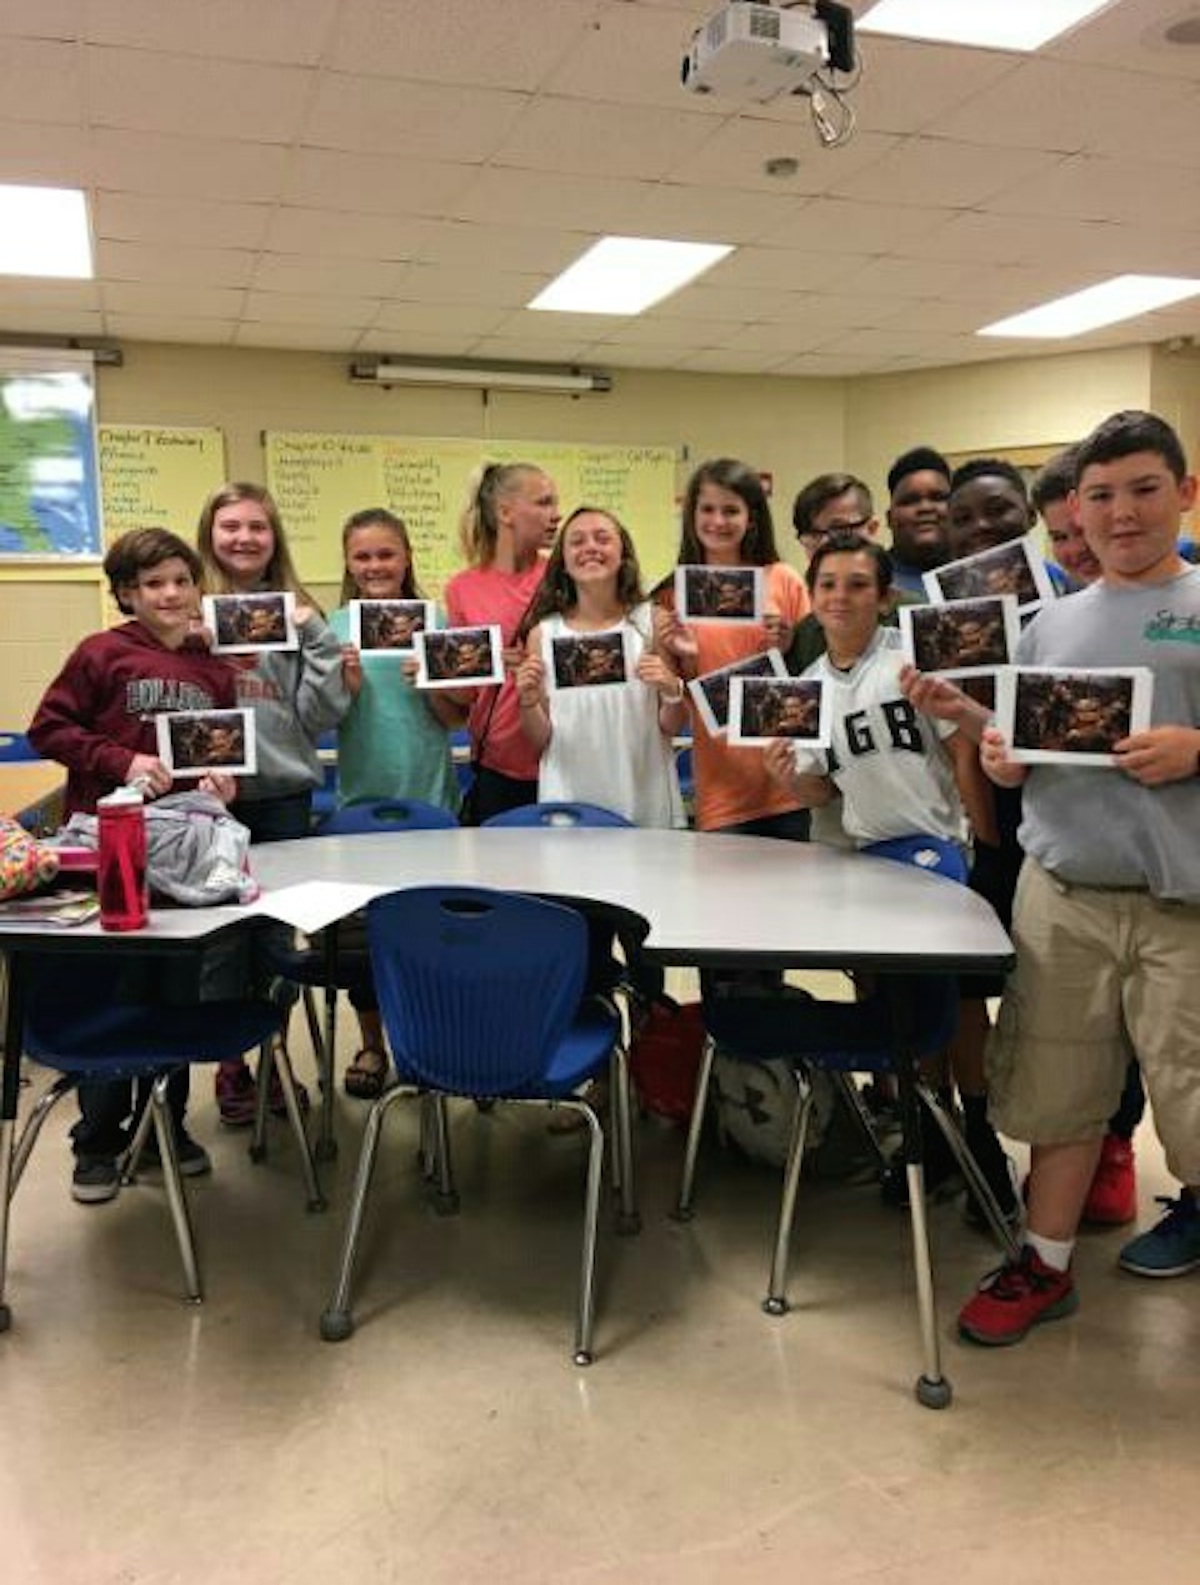 Presentation to sixth grade class Williams elementary school Pell City Alabama. They use the American Journey history book American that the pic is in. Over 400 n that class all received autographed pic. Here are a few of them